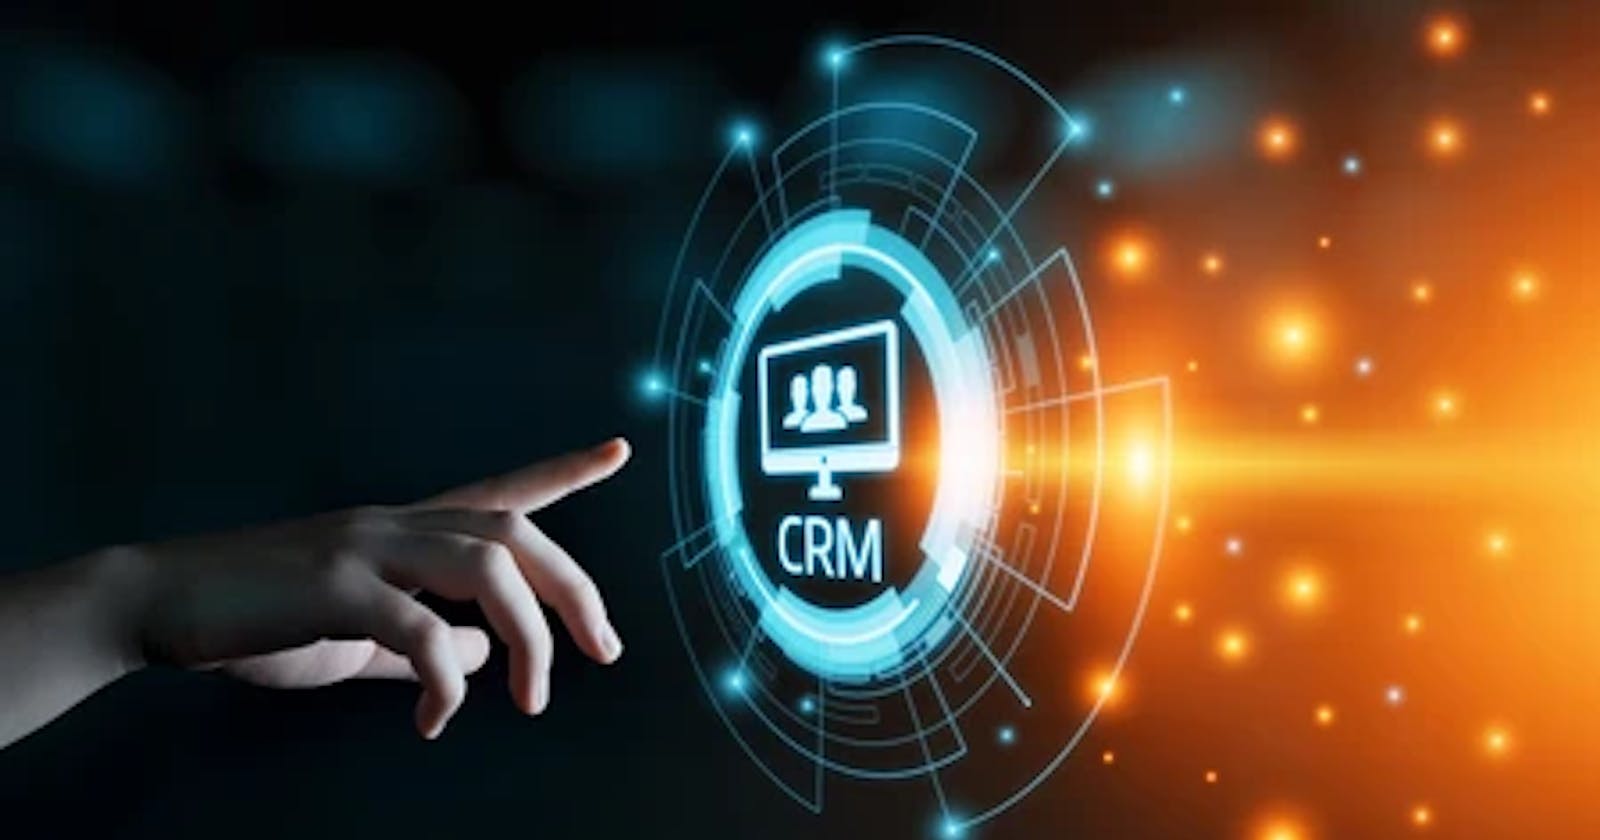 What Is Crm😦